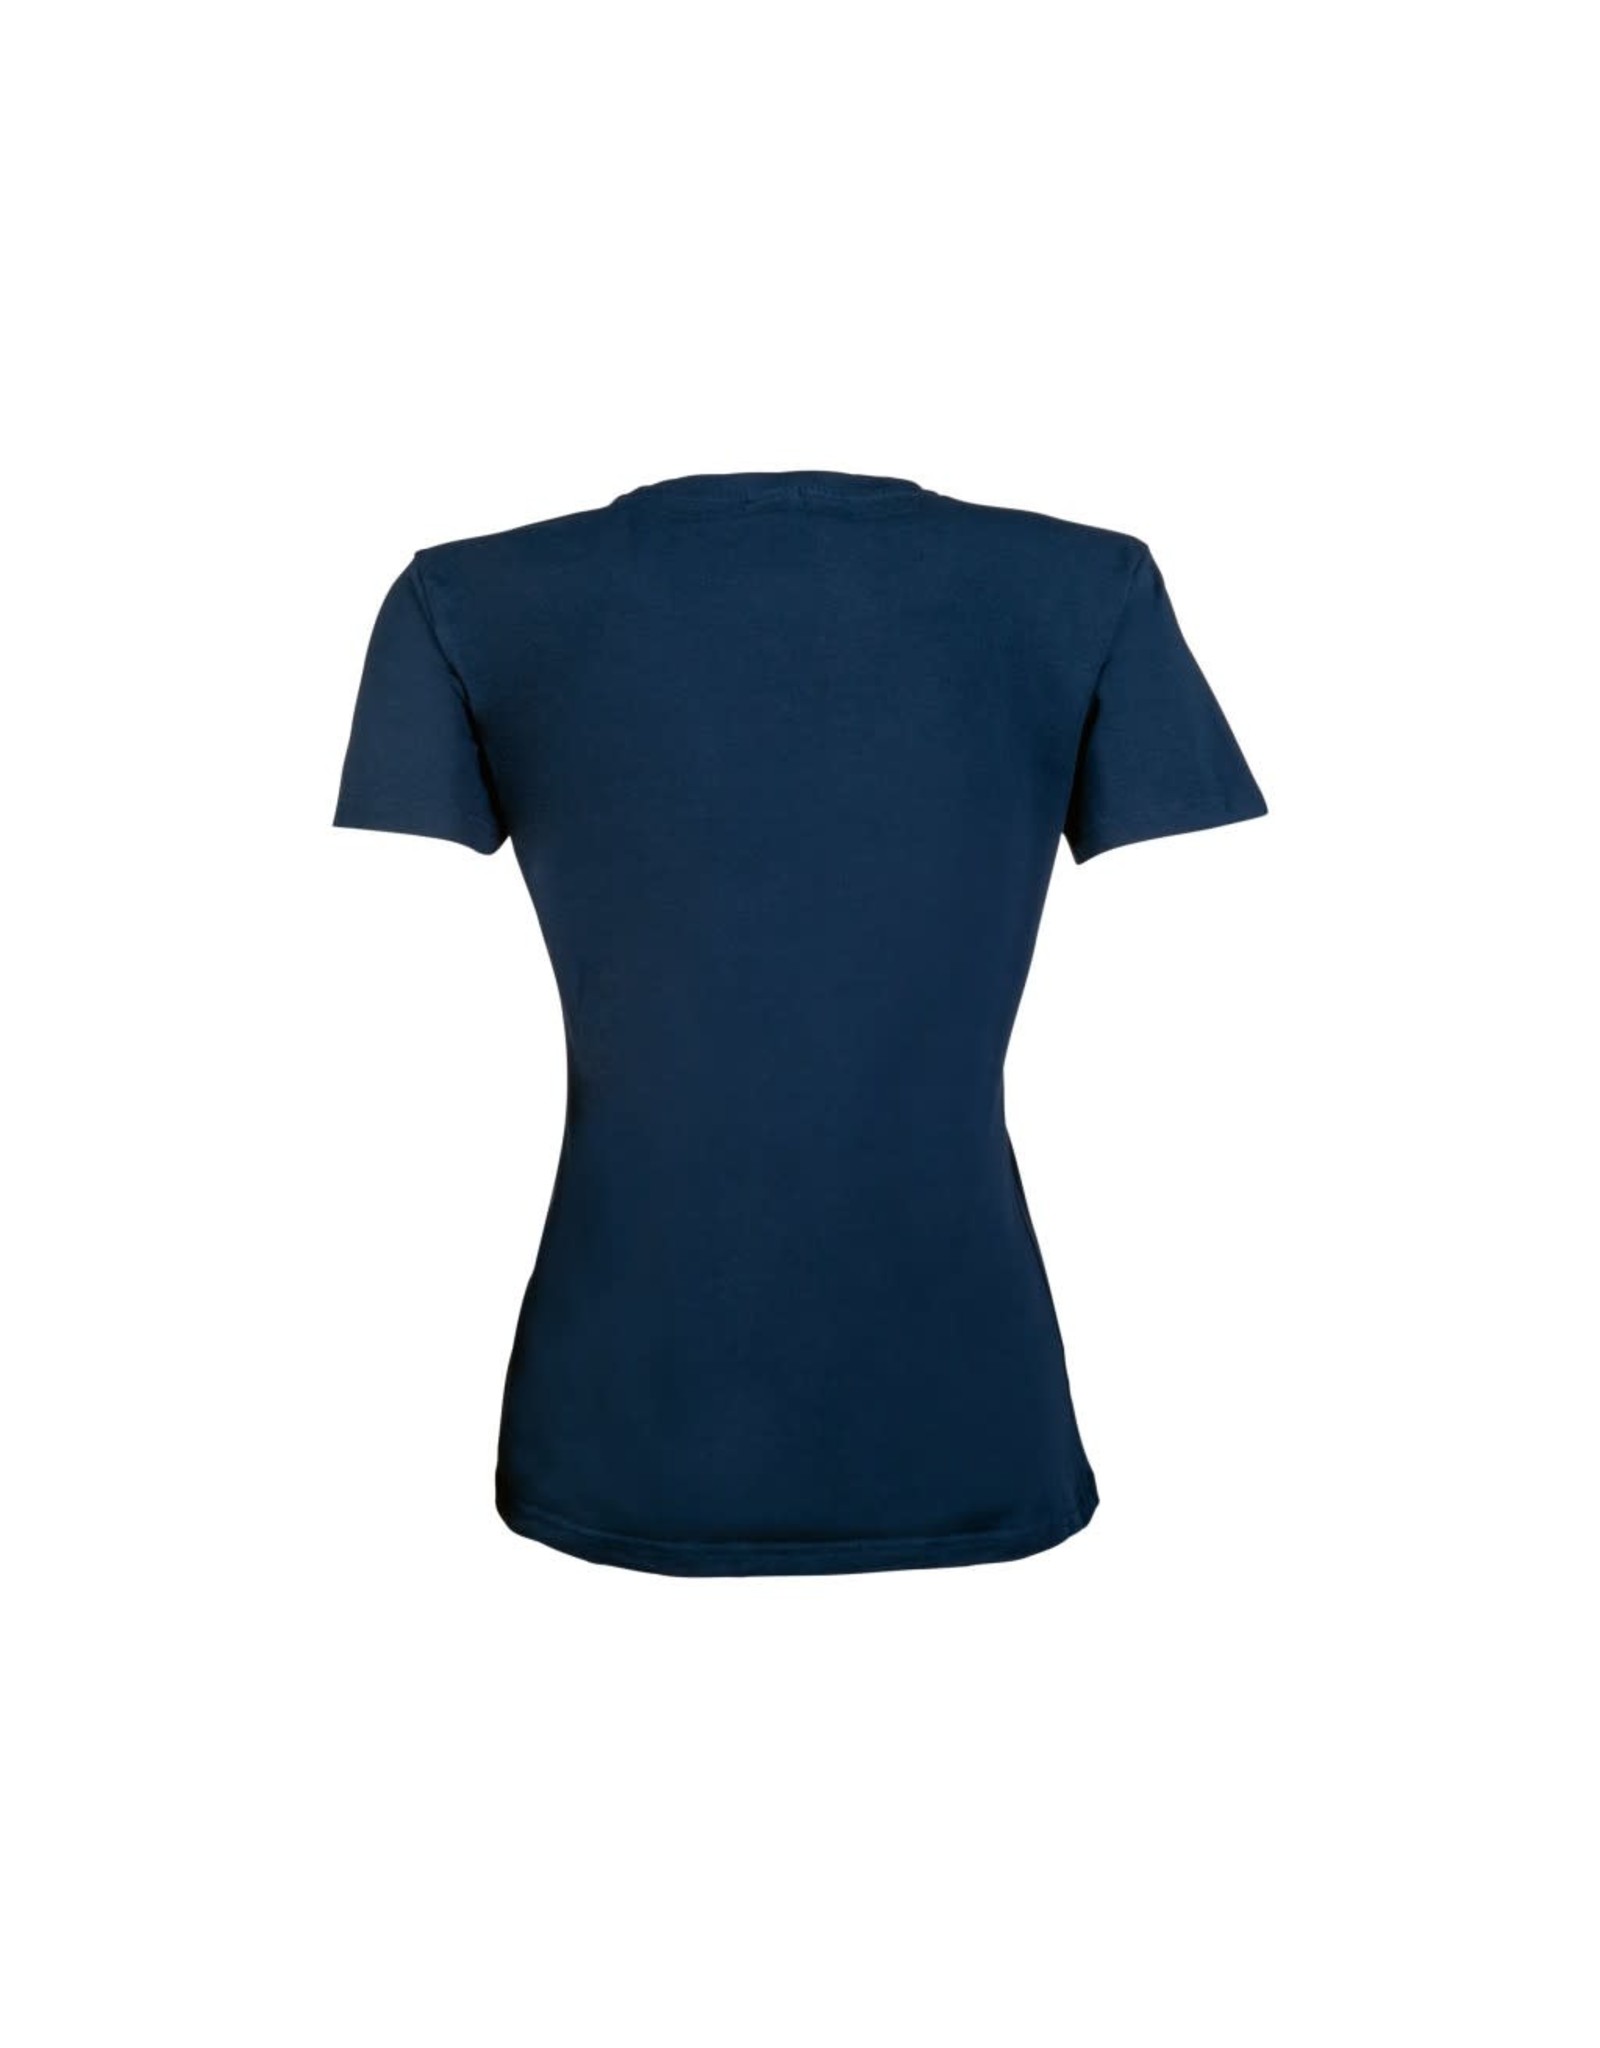 HKM T-Shirt Colorful Horse Navy Ladies